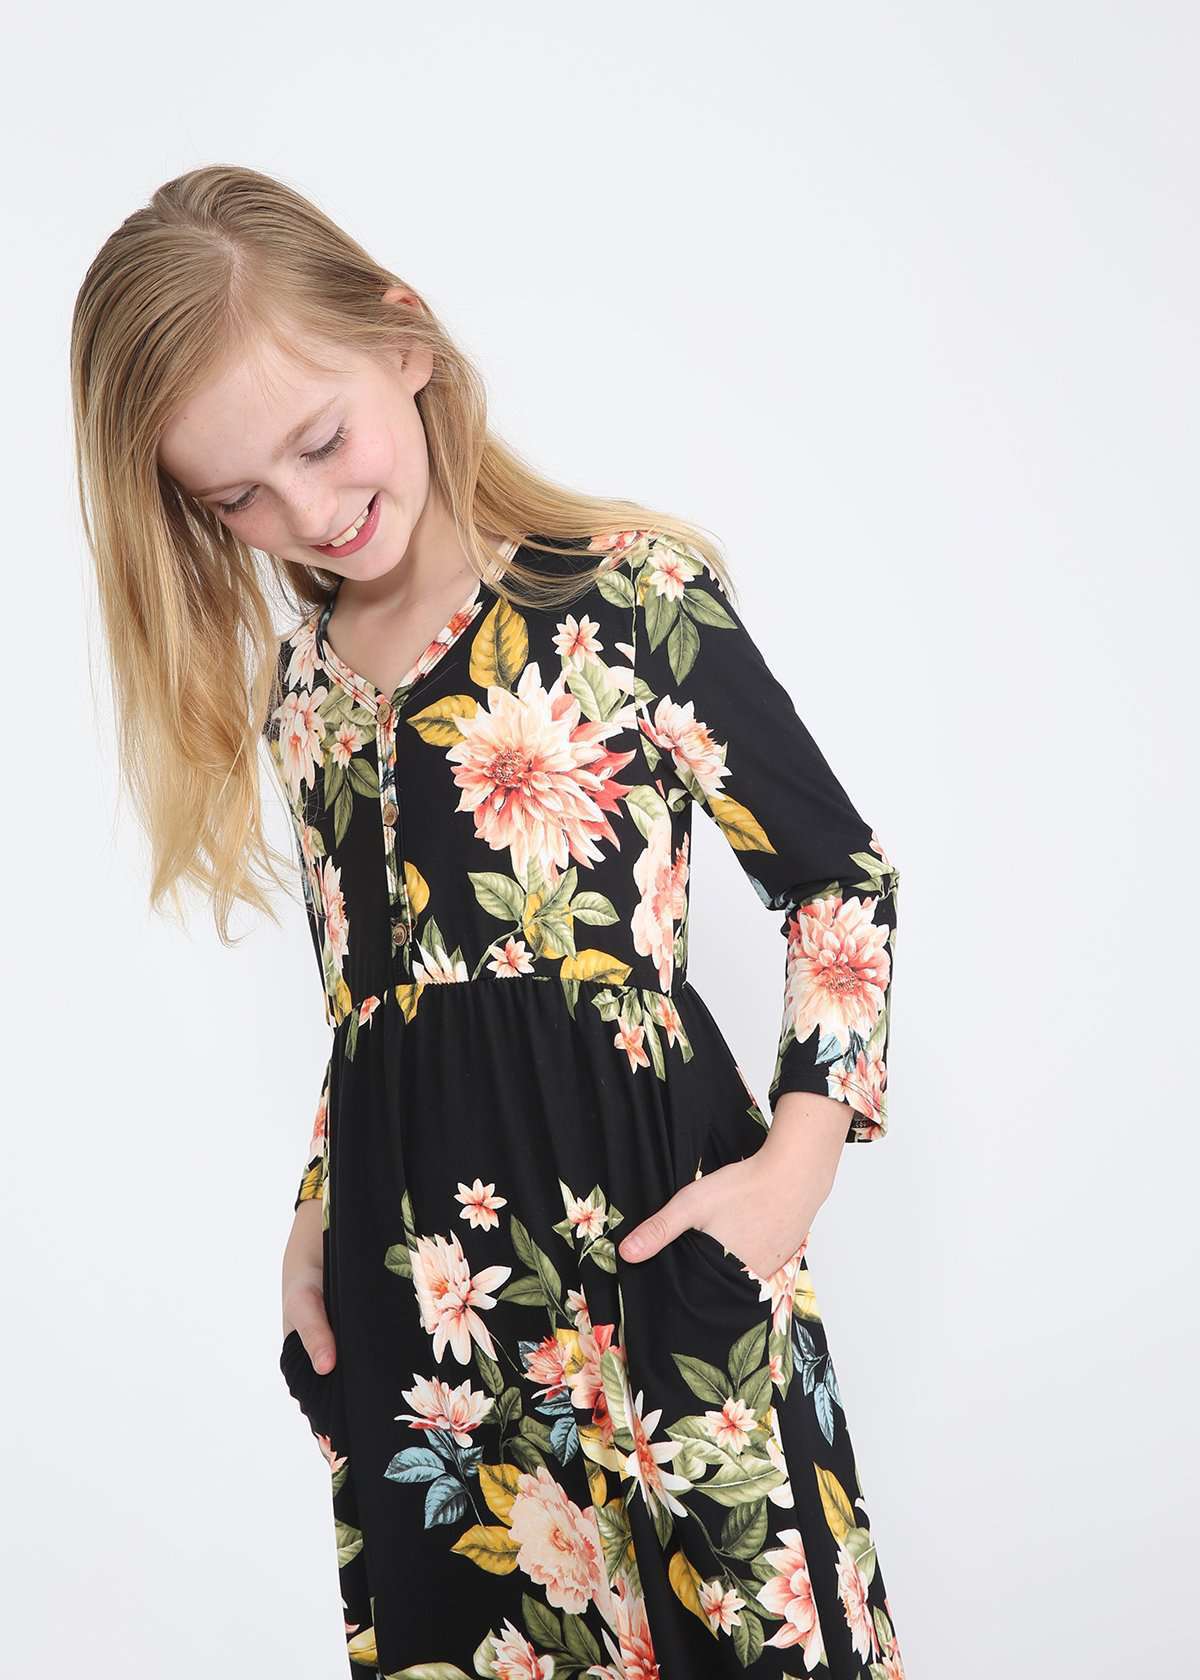 young girl wearing a modest black maxi dress with flowers on it